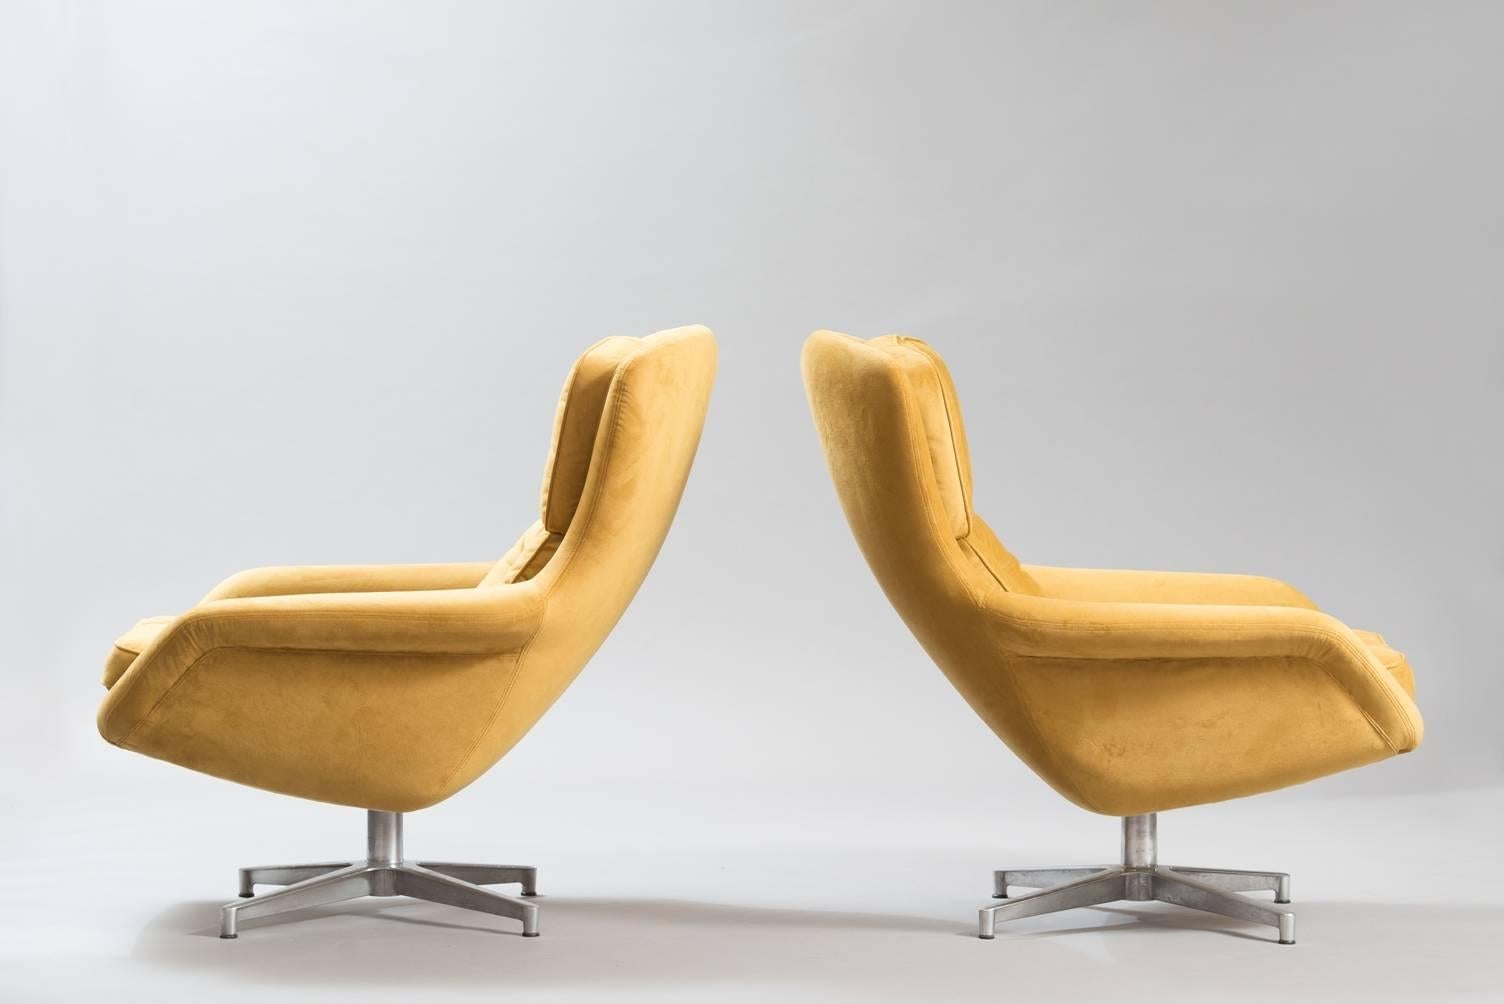 A pair of swivel chairs, re-upholstered in yellow mustard velvet, aluminium base.
Producer: DUX.